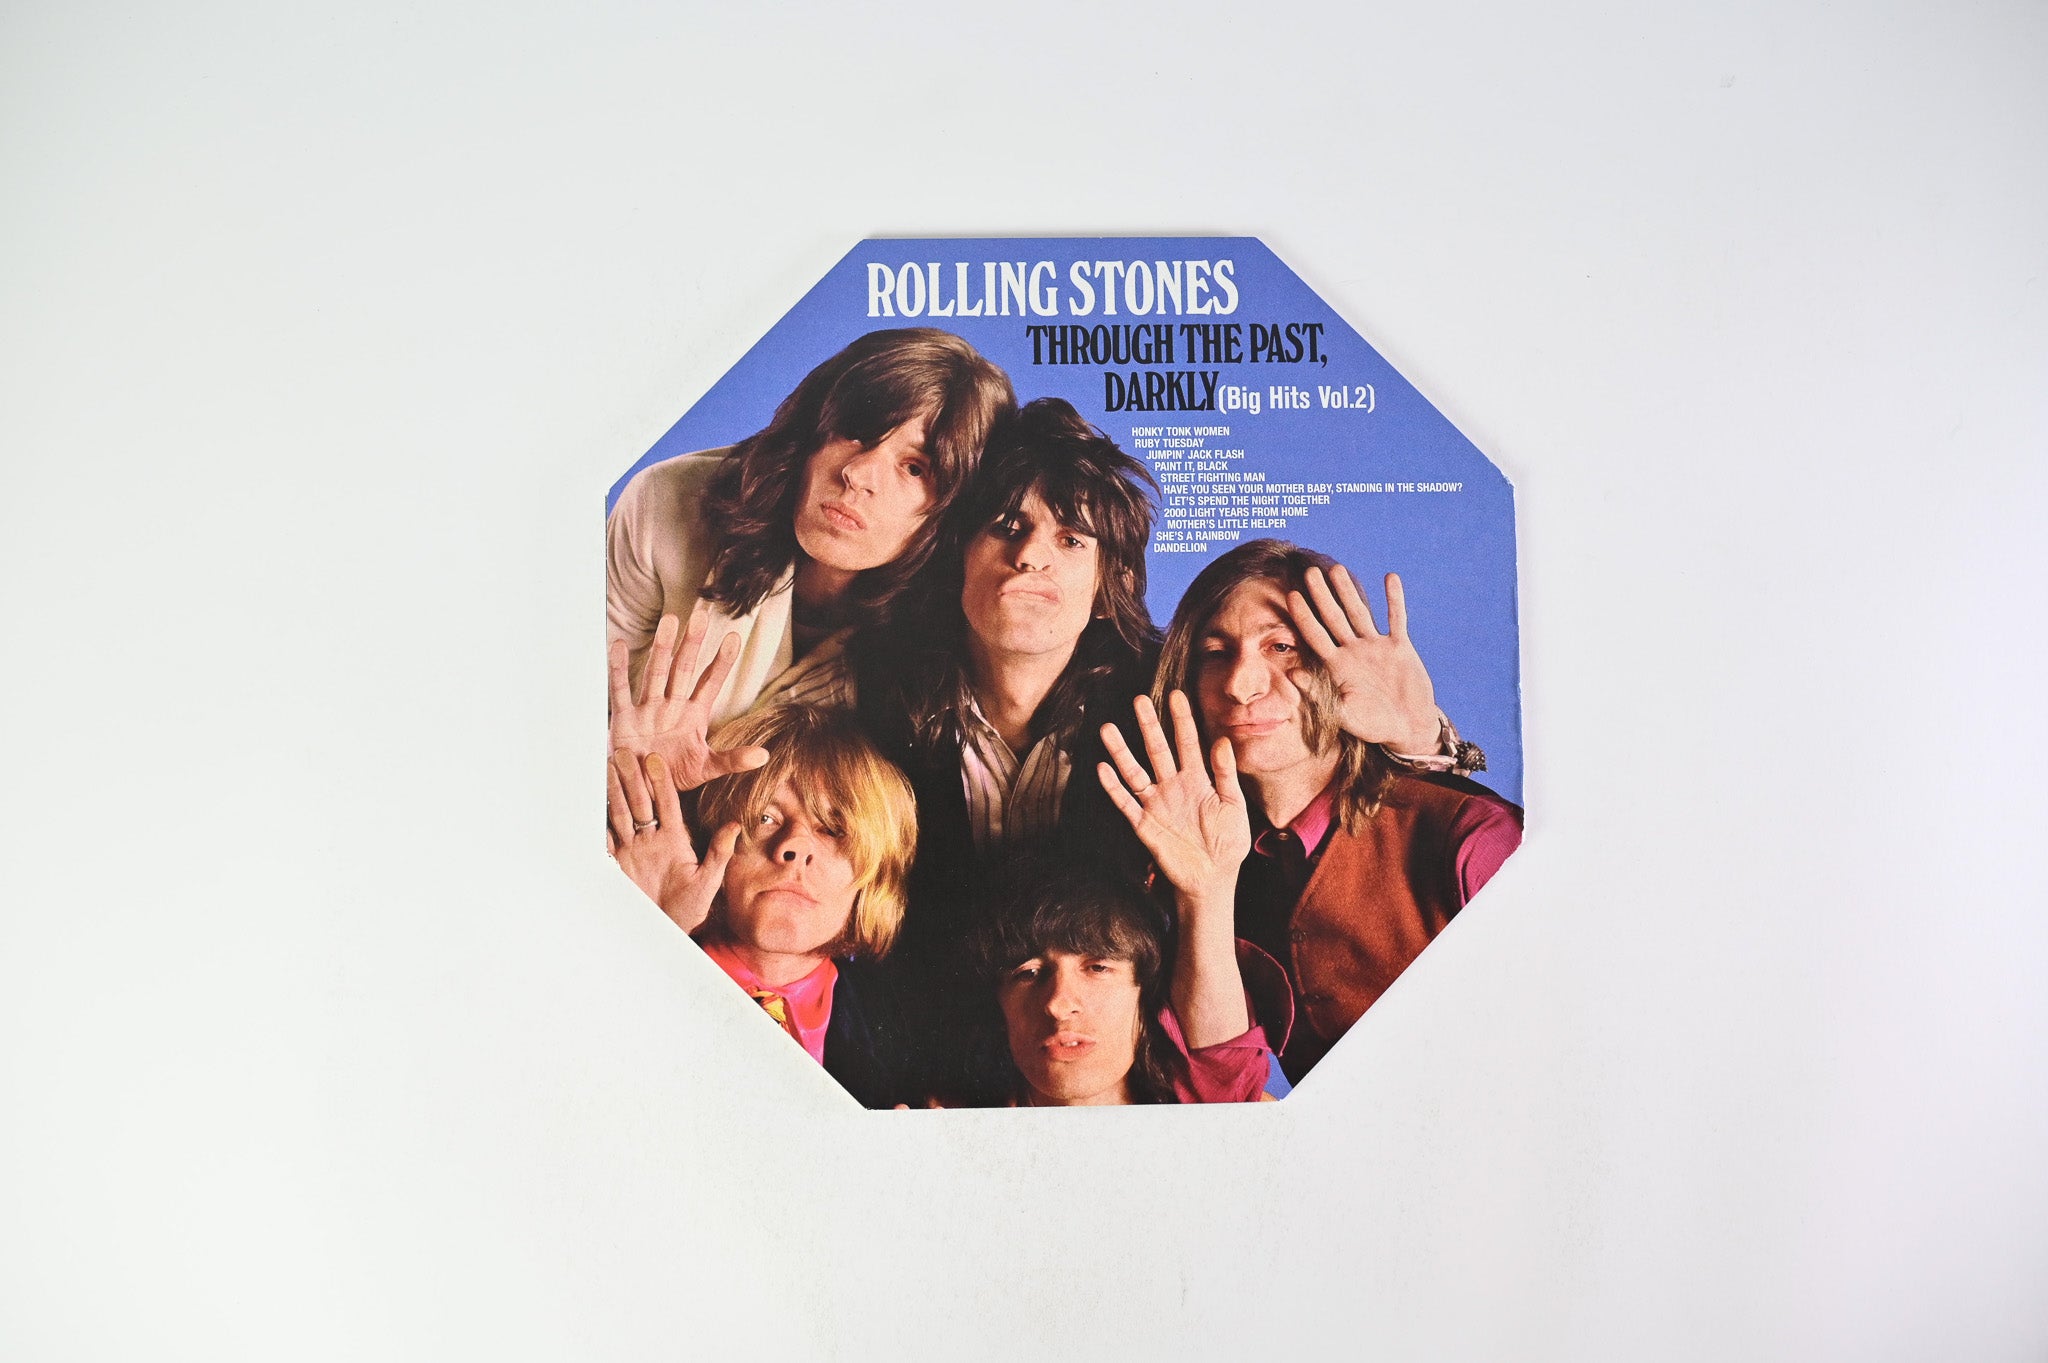 The Rolling Stones - Through The Past, Darkly (Big Hits Vol. 2) on ABKCO Clear Vinyl Reissue